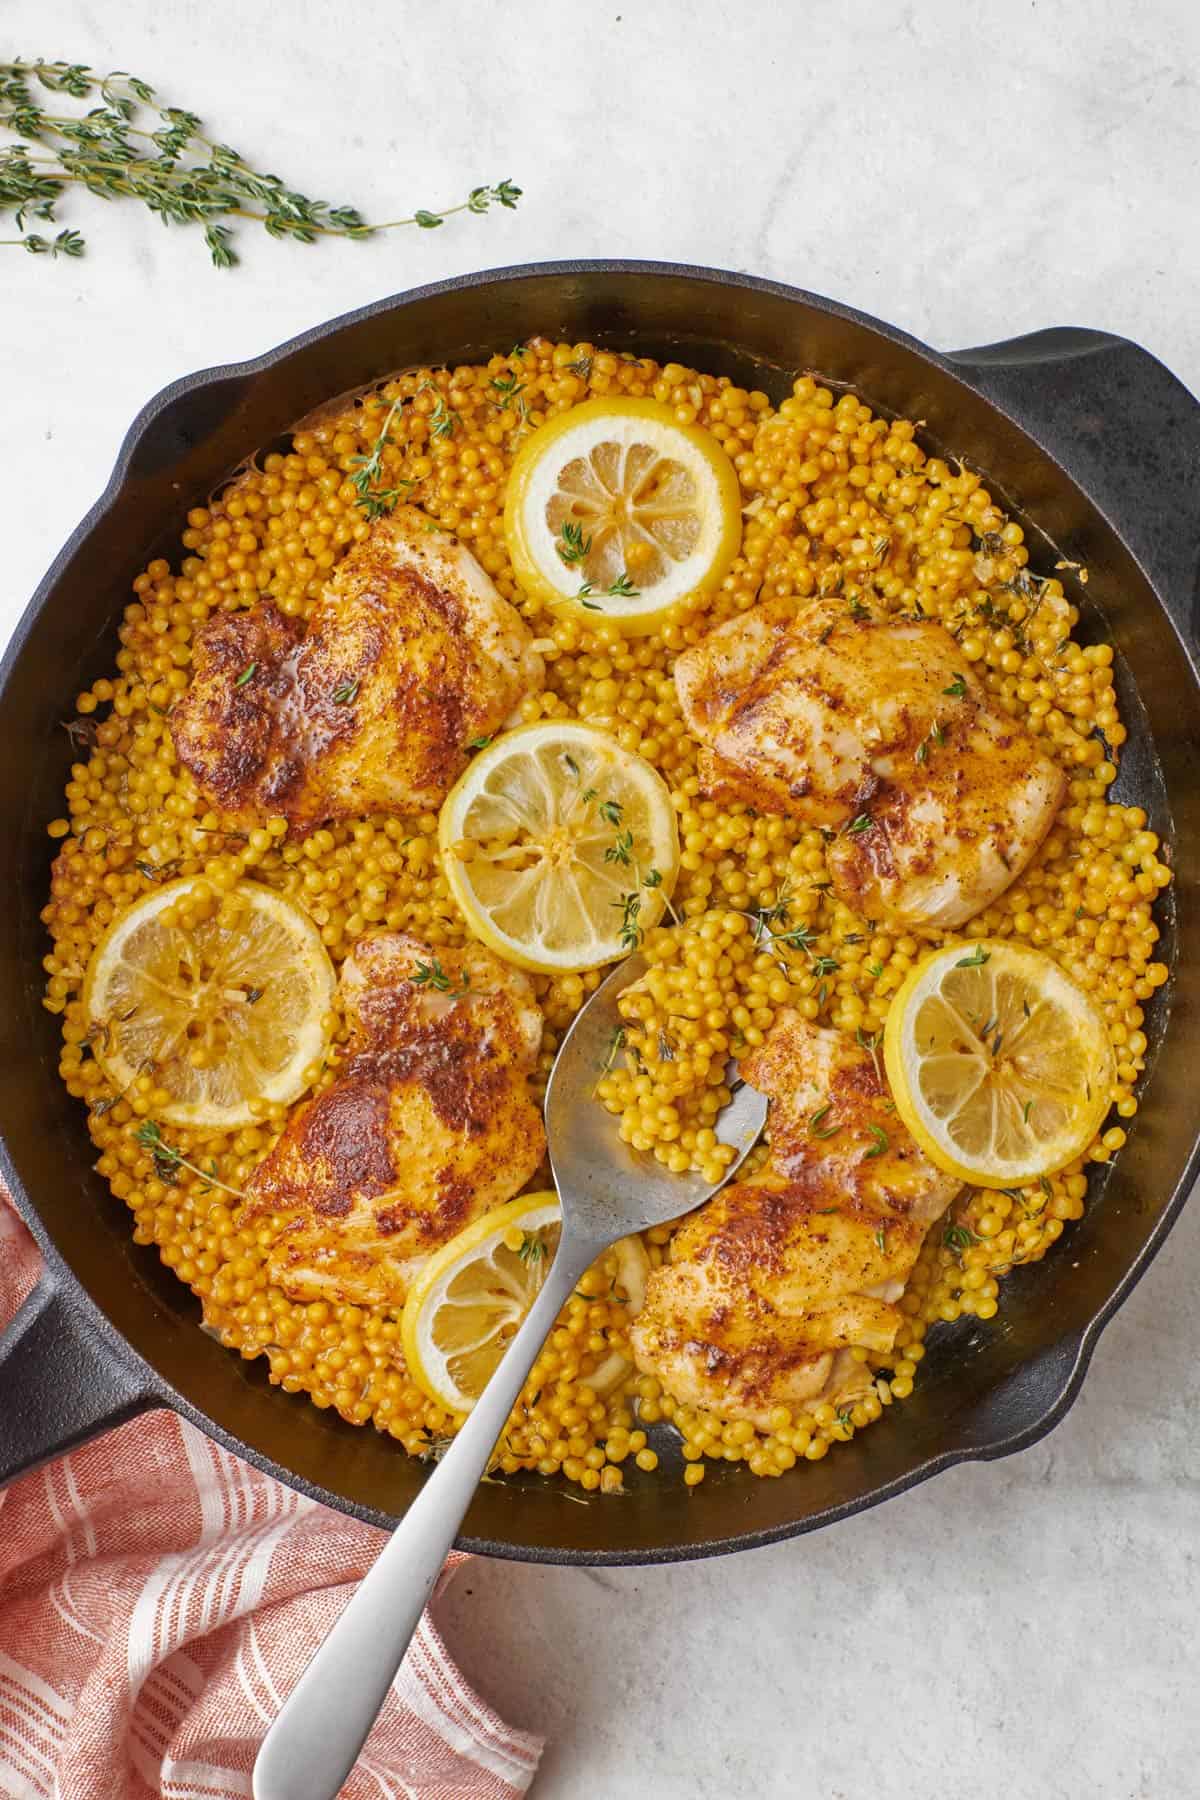 Skillet chicken with couscous in a large back cast iron skillet